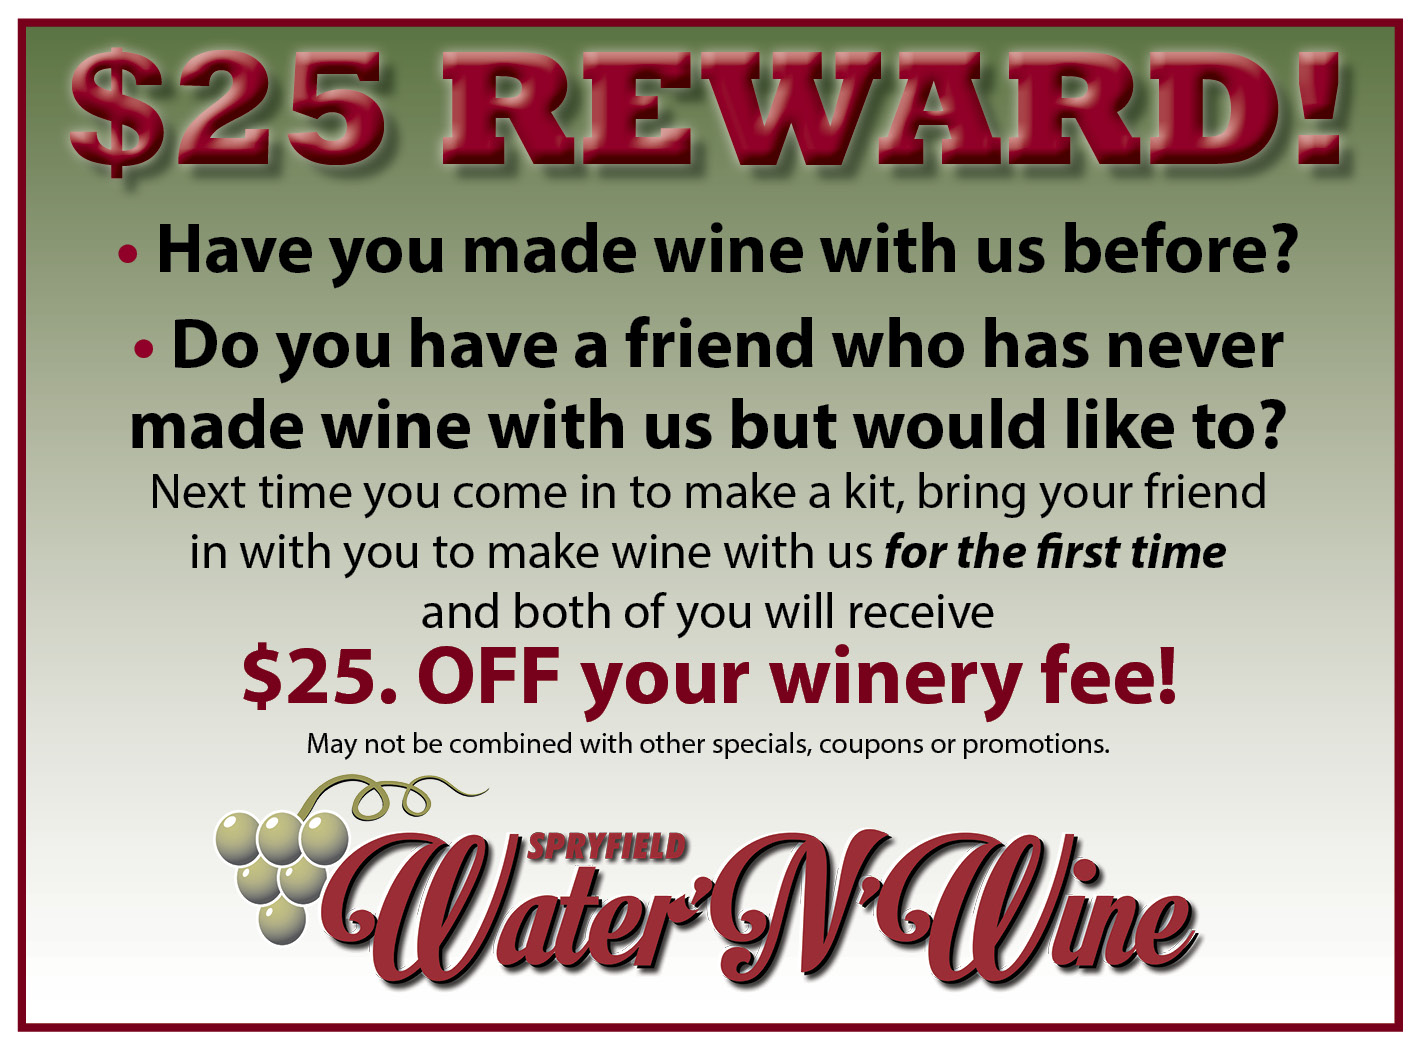 winery fee coupon